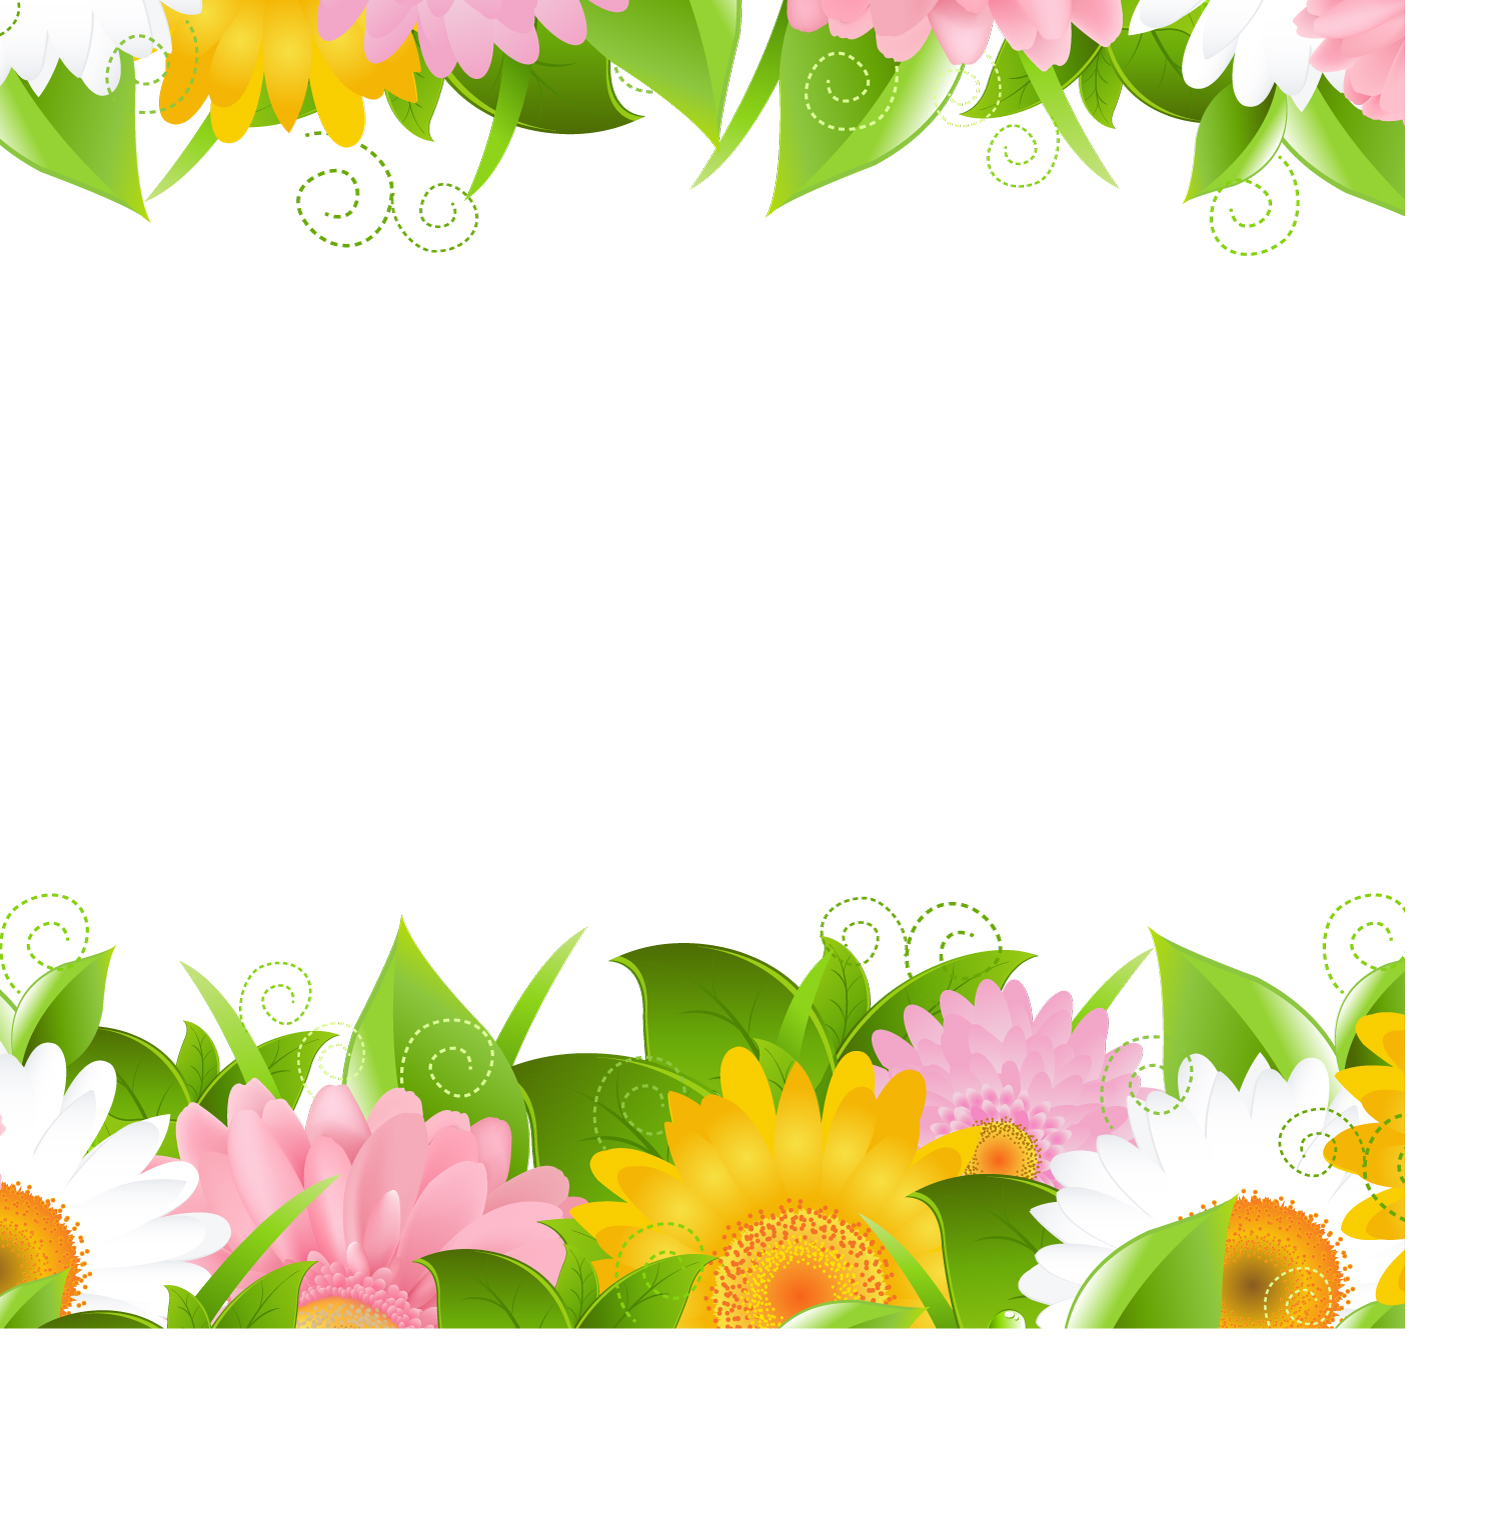 free vector clipart flowers - photo #27